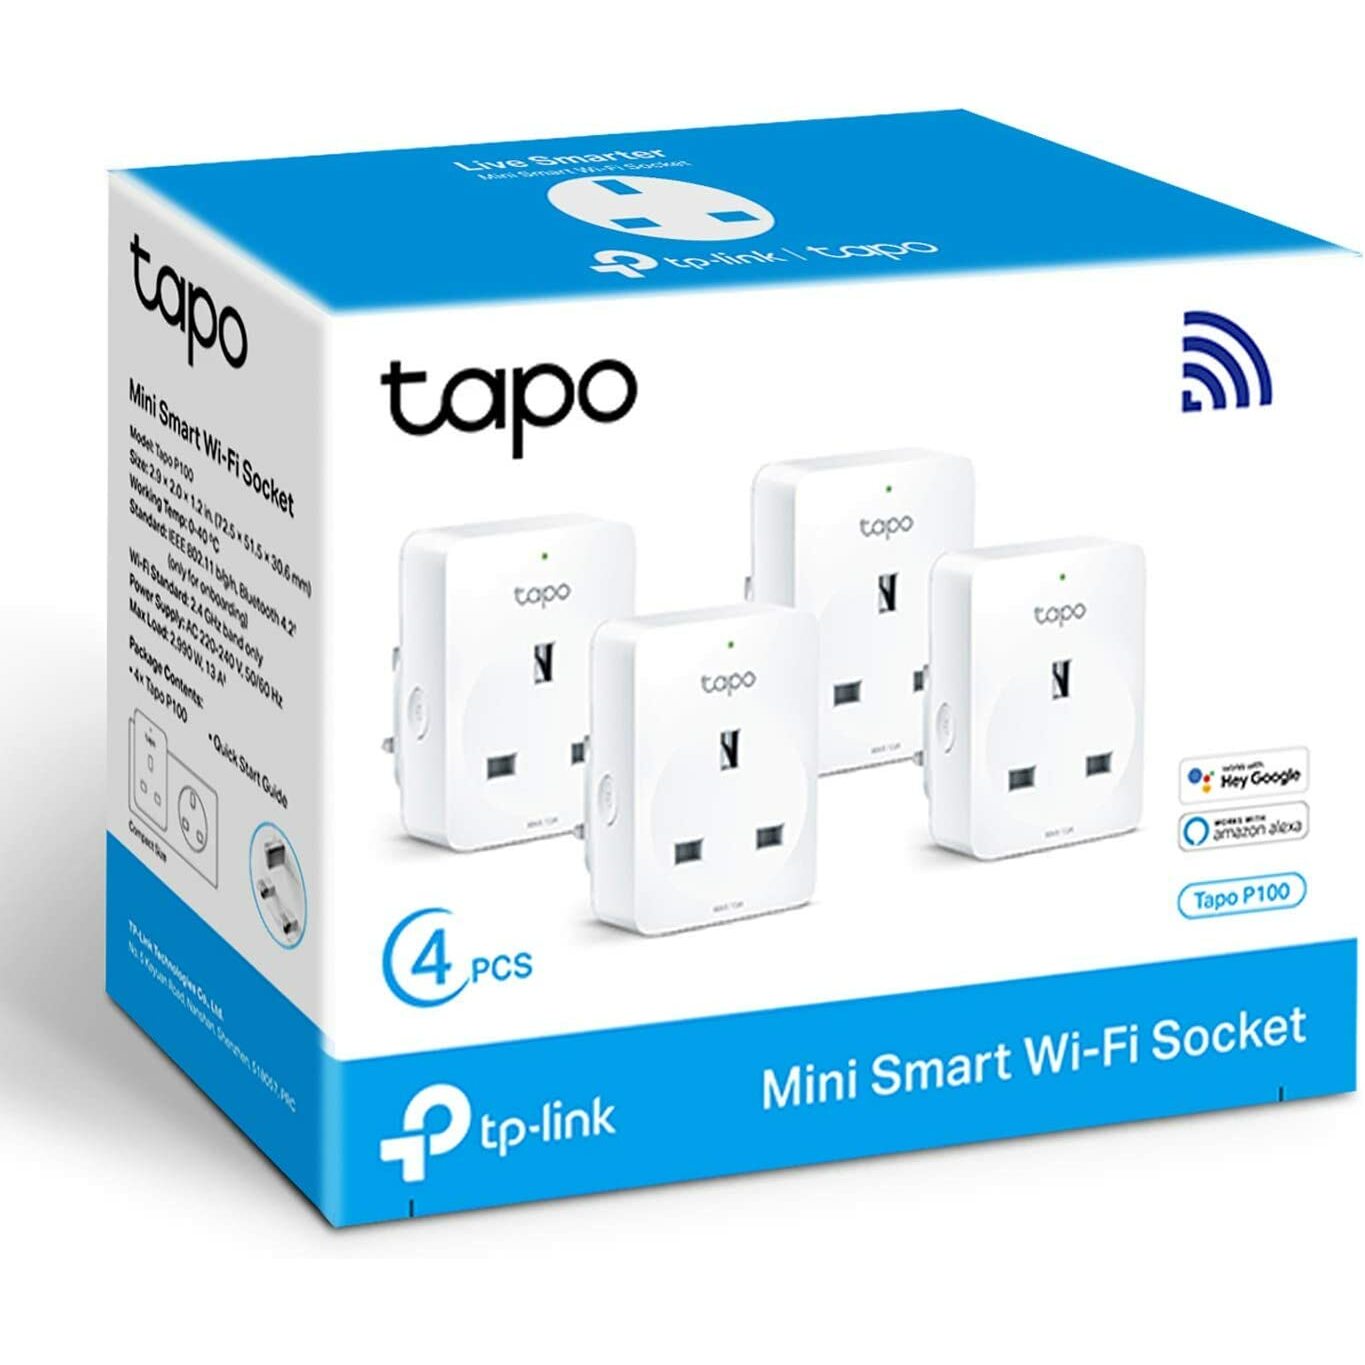 https://www.falconcomputers.co.uk/media/products/98992/0/0/tp-link-tapo-smart-plug-wi-fi-outlet-works-with-amazon-alexa-echo-and-echo-dot-google-home-wireless-smart-socket-device-sharing-without-energy-monitoring-no-hub-required---tapo-p100-4-pack.jpg.jpg